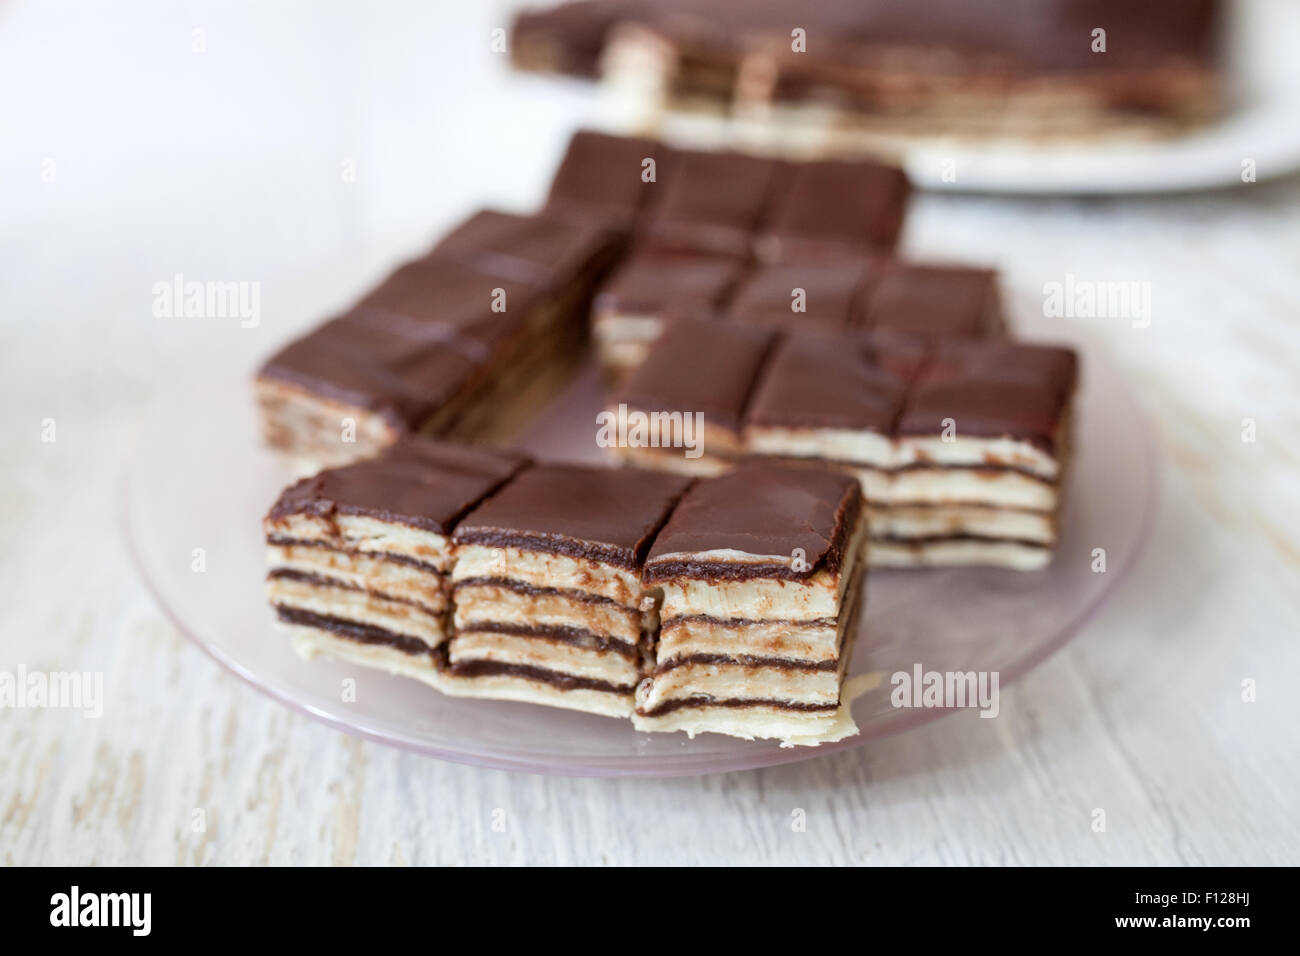 Chocolate Biscuit Stock Photo